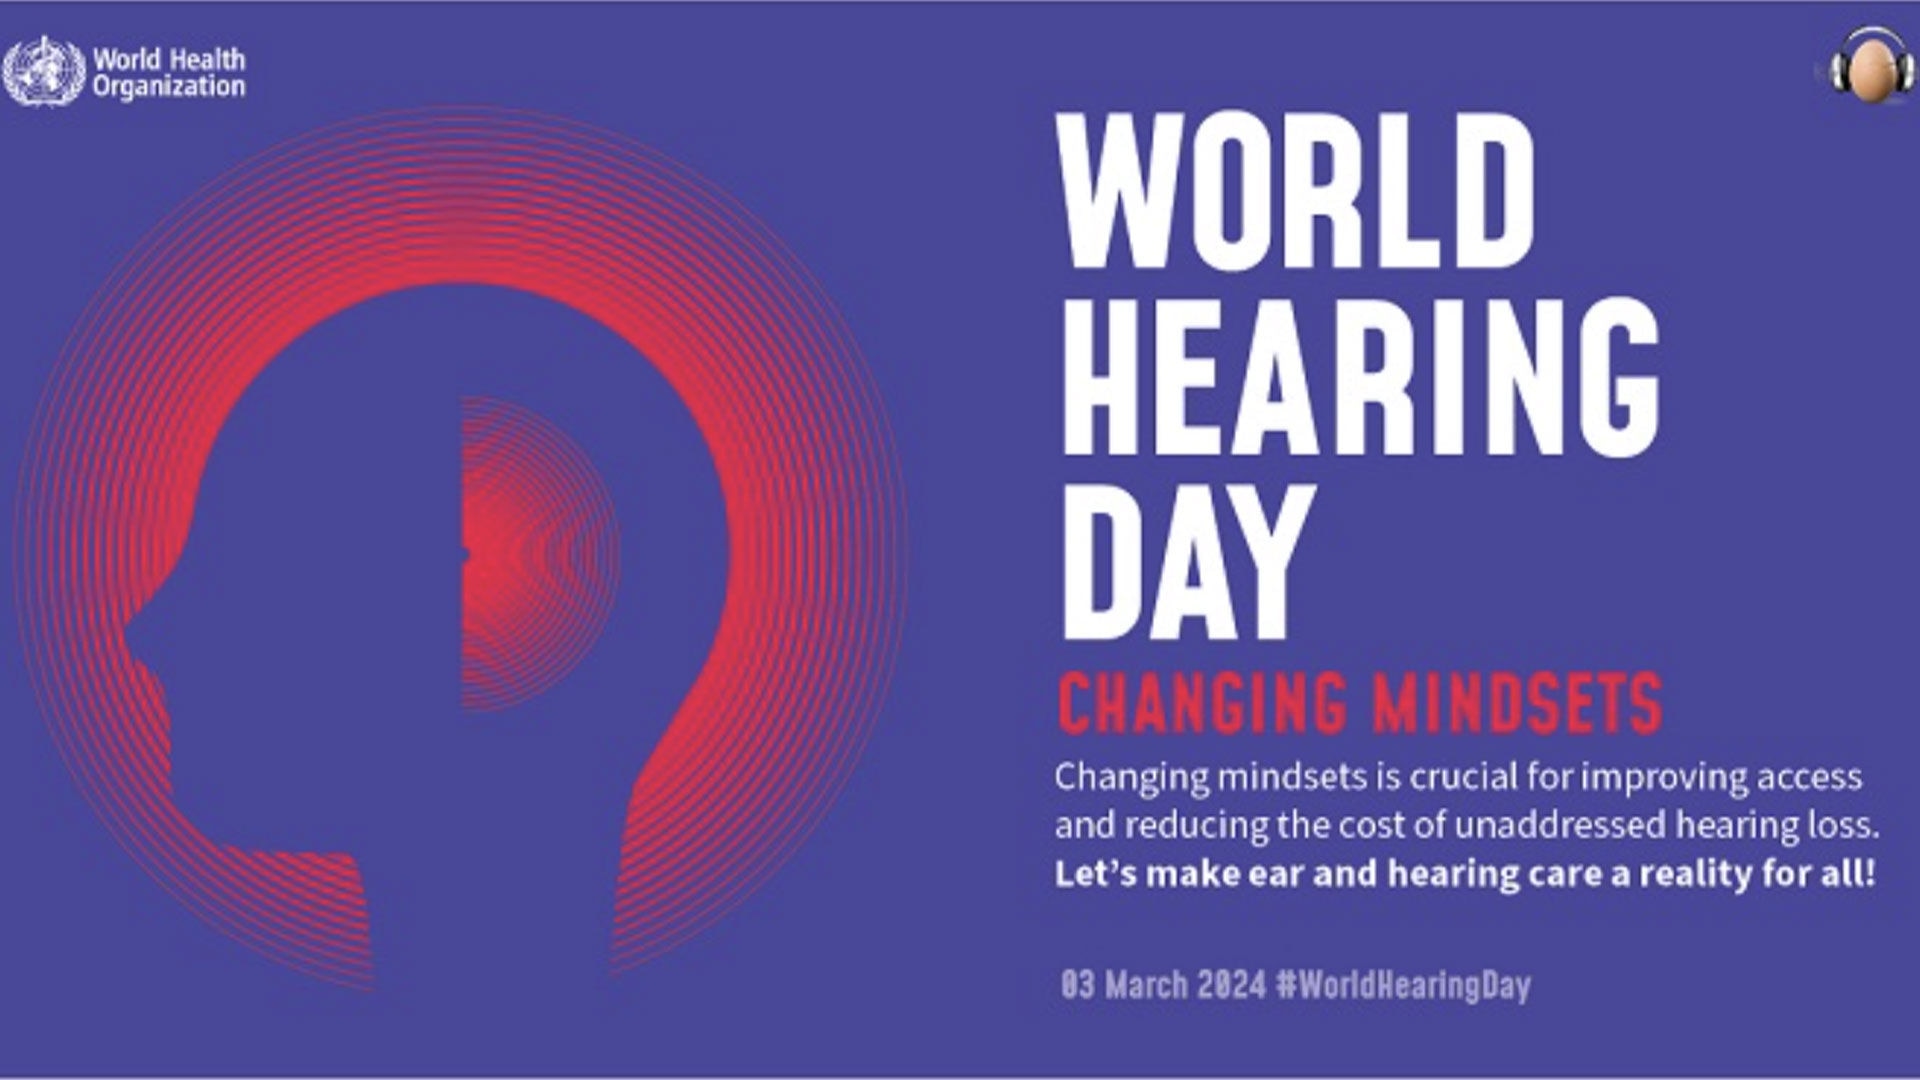 Help change mindsets for World Hearing Day